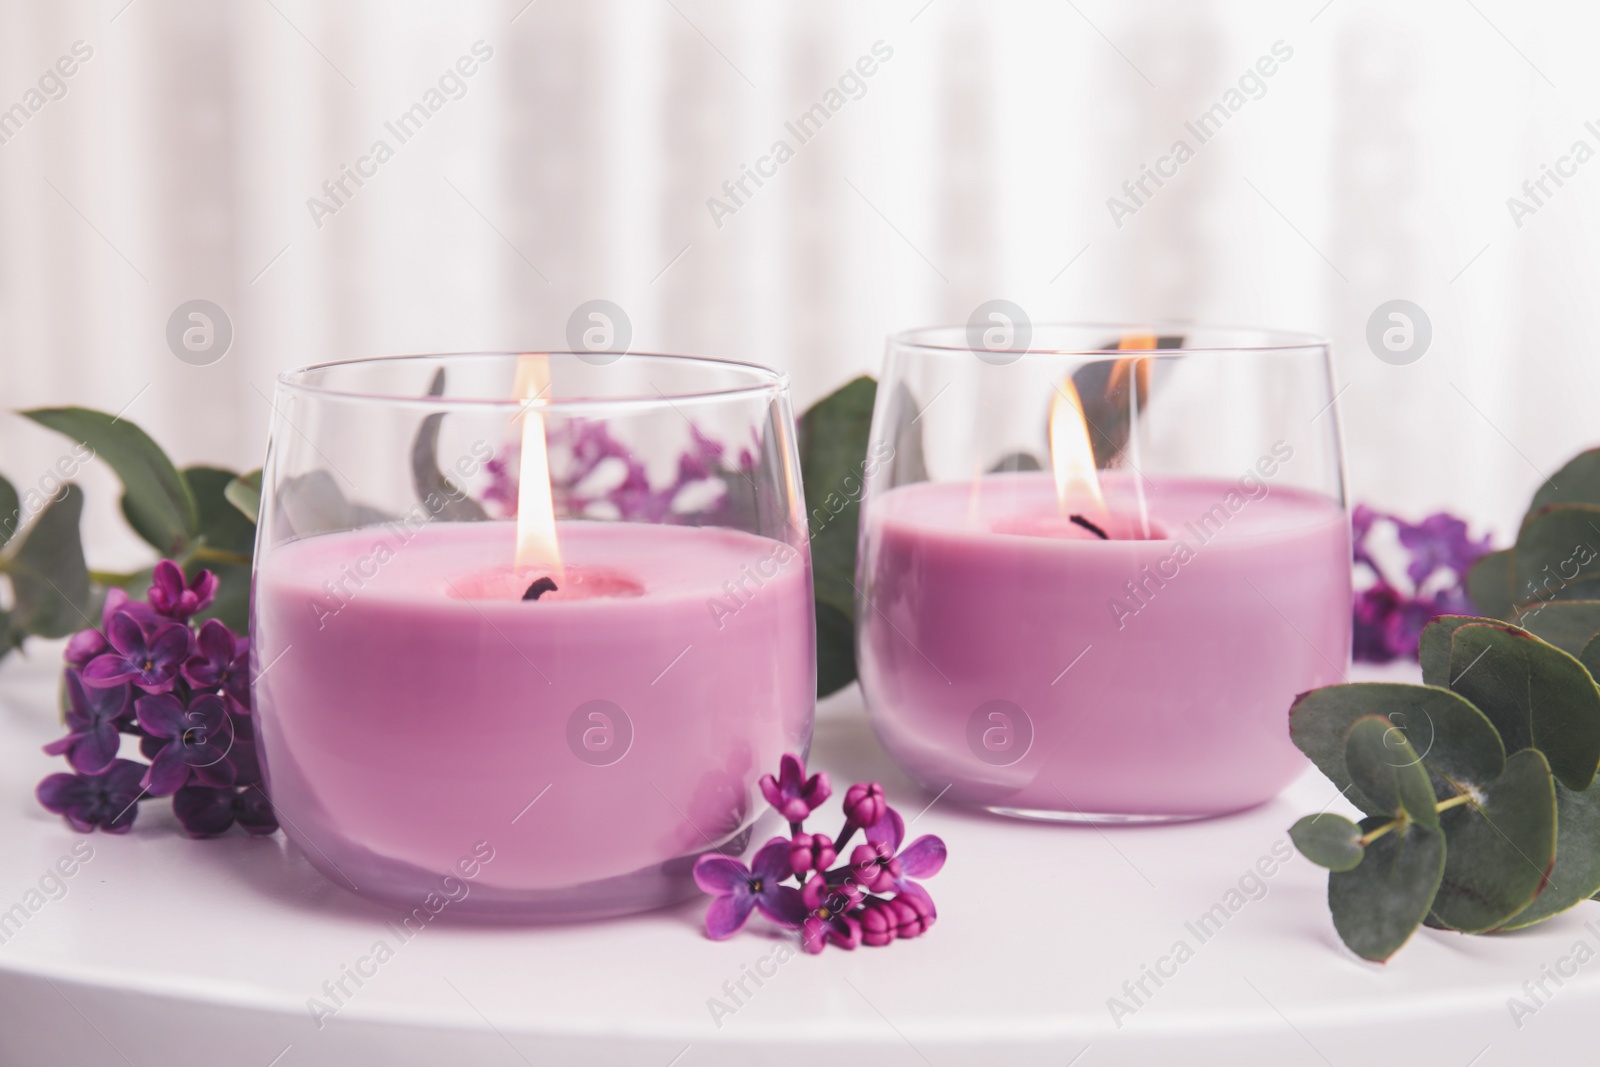 Image of Burning candles in glass holders and flowers with leaves on white table